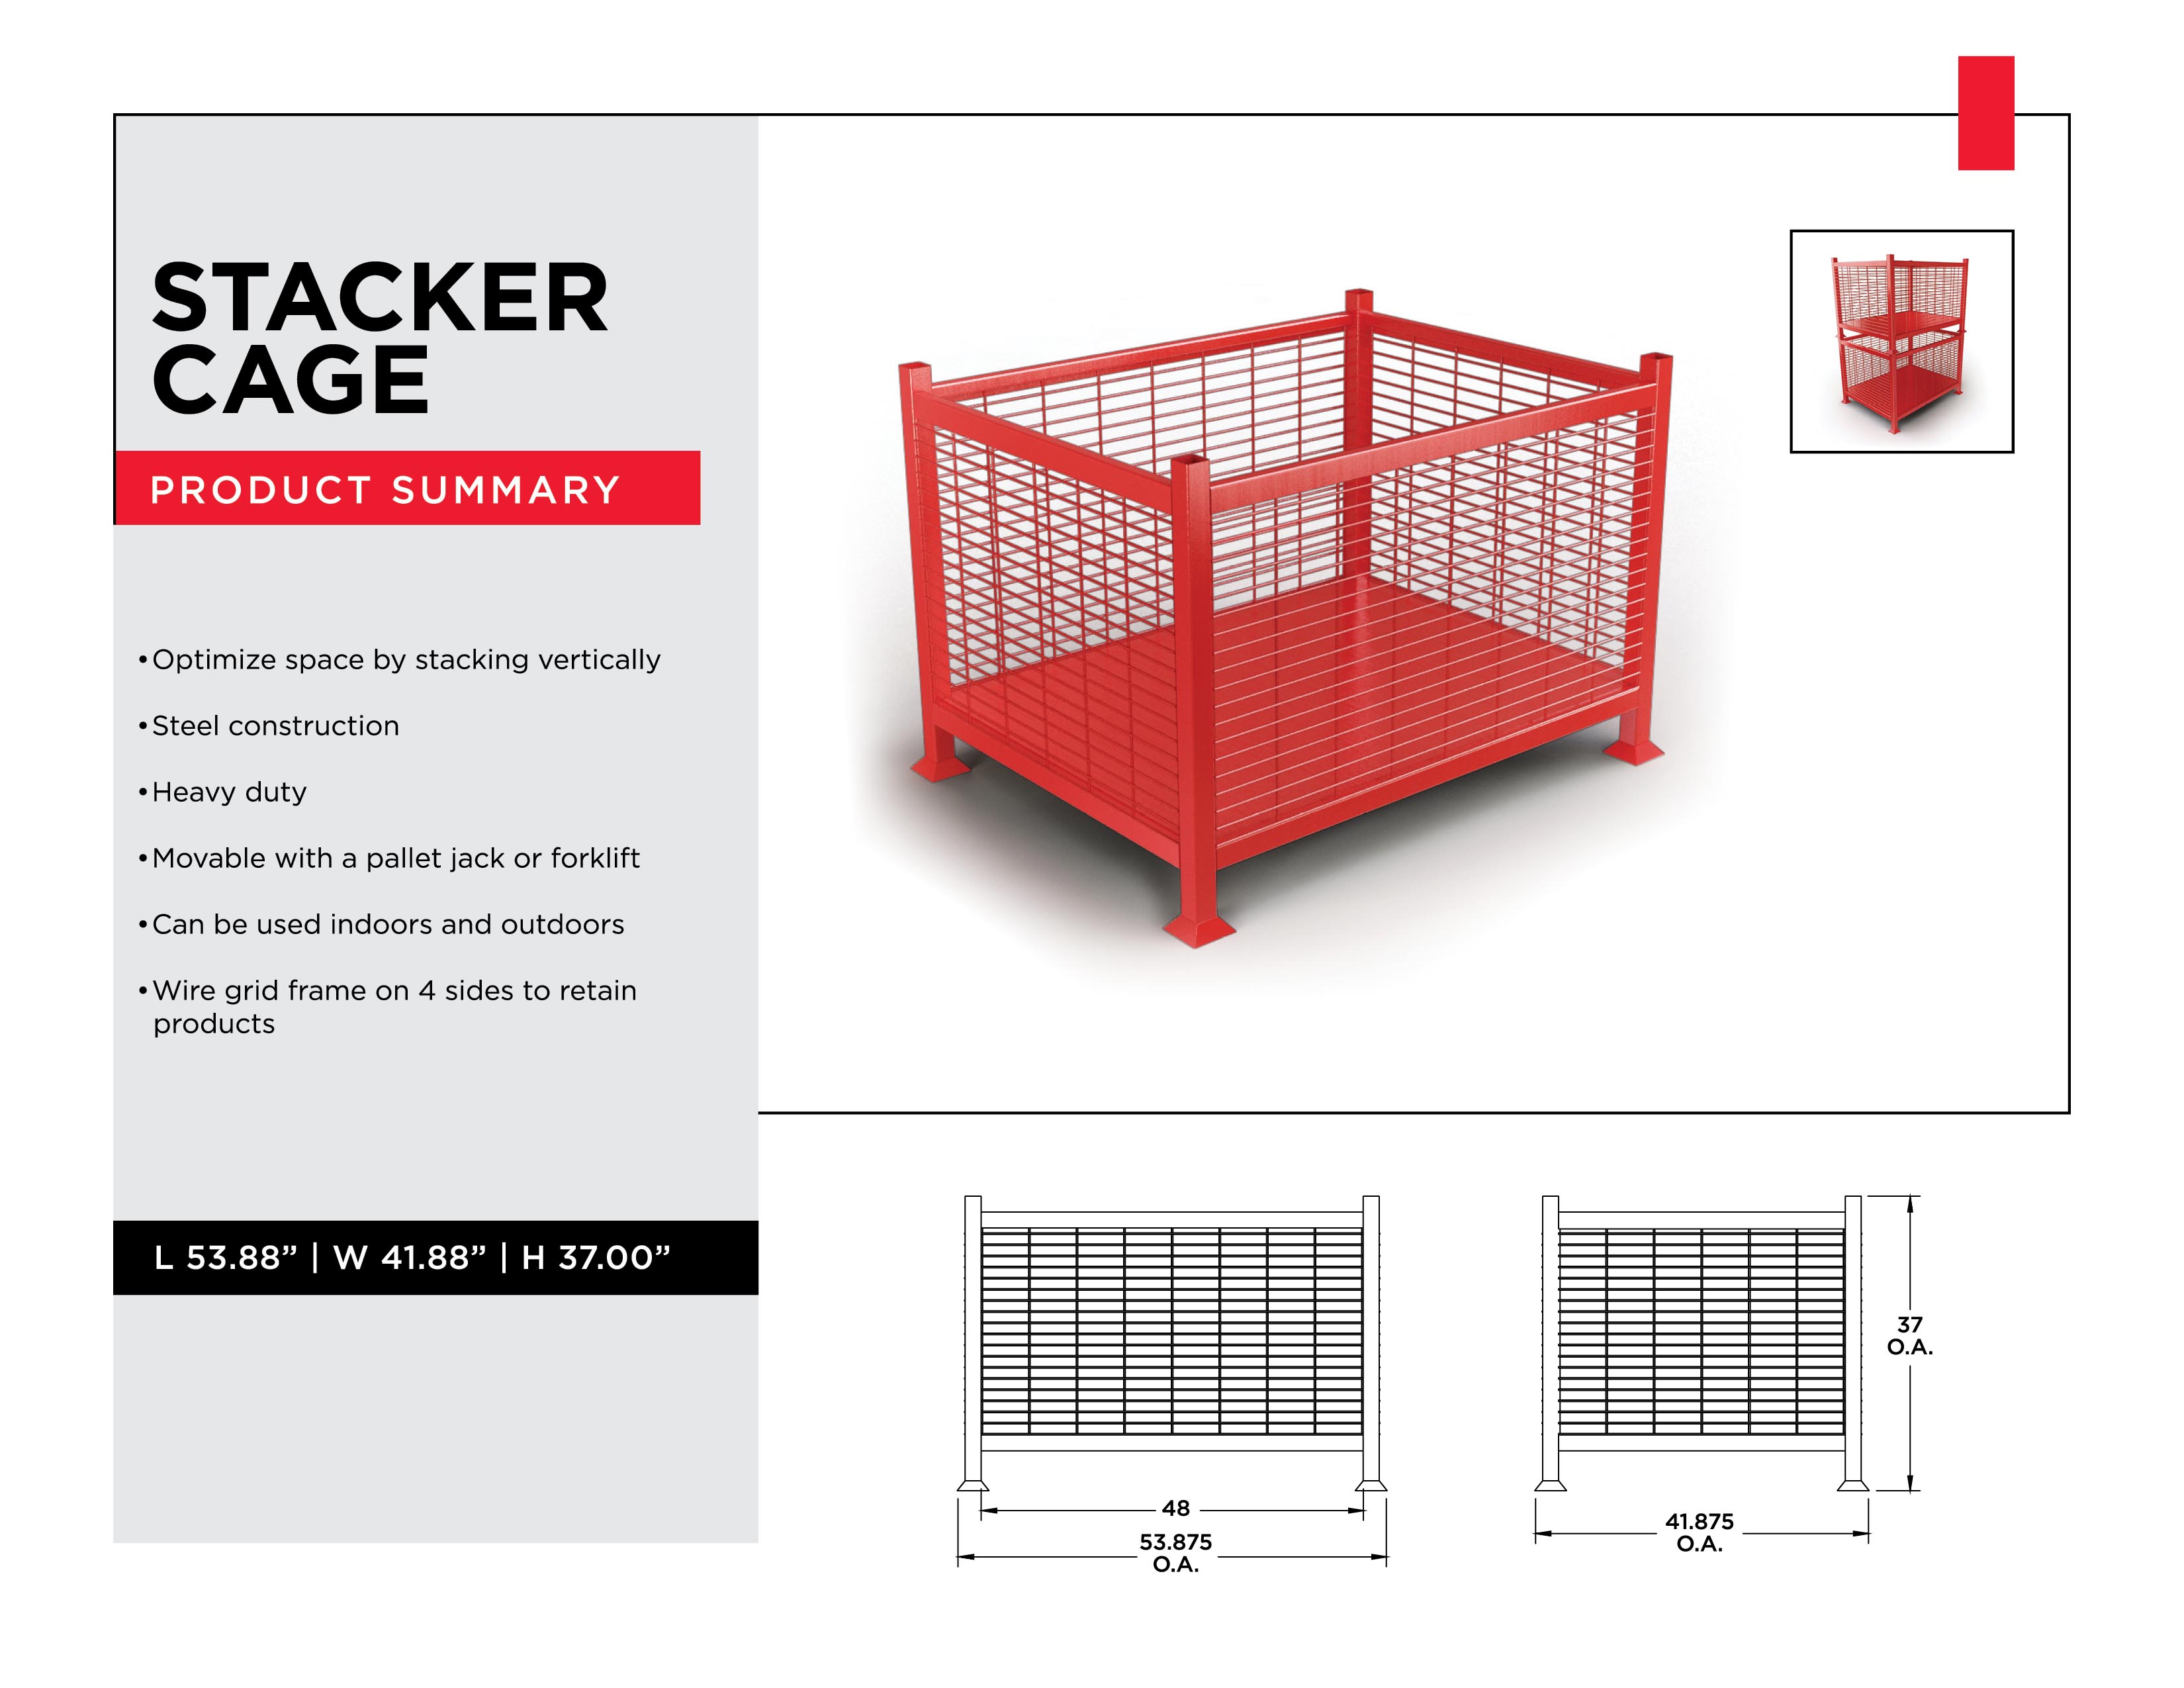 Stacker Cage - Vertical Warehouse Storage Solution - Material Handling Solutions - Material Handling Equipment - Material Handling